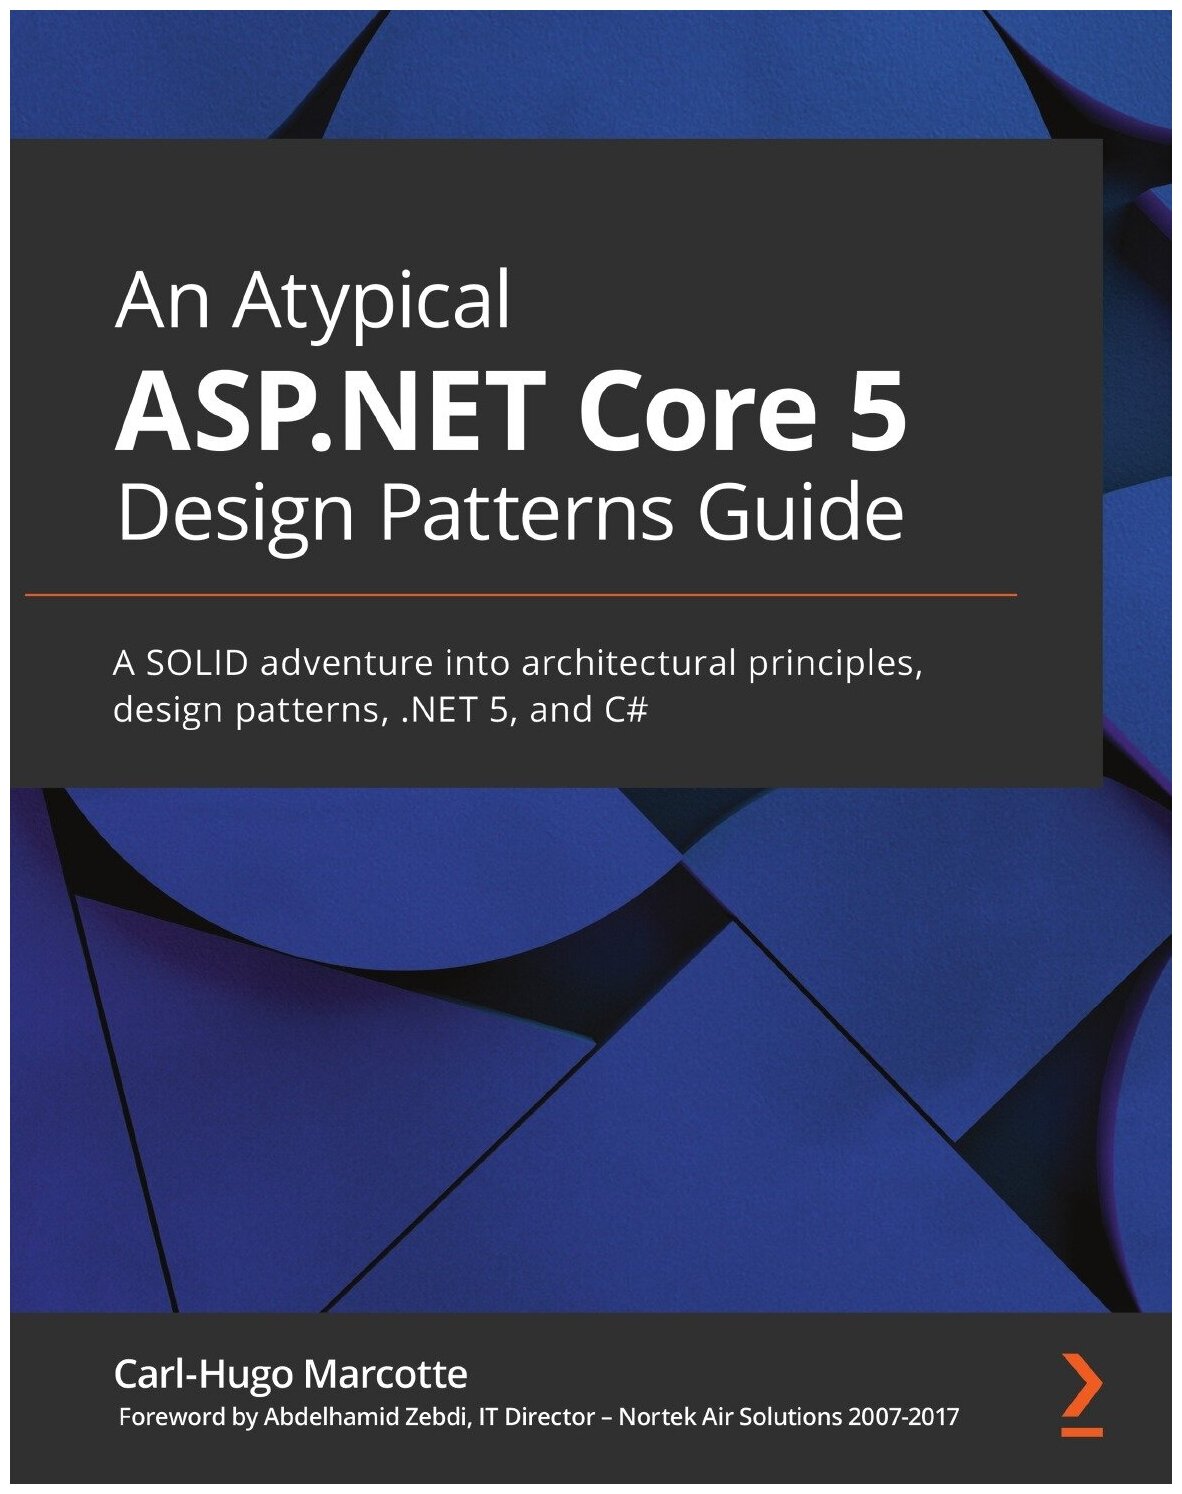 An Atypical ASP.NET Core 5 Design Patterns Guide. A SOLID adventure into architectural principles, design patterns, . NET 5, and C#